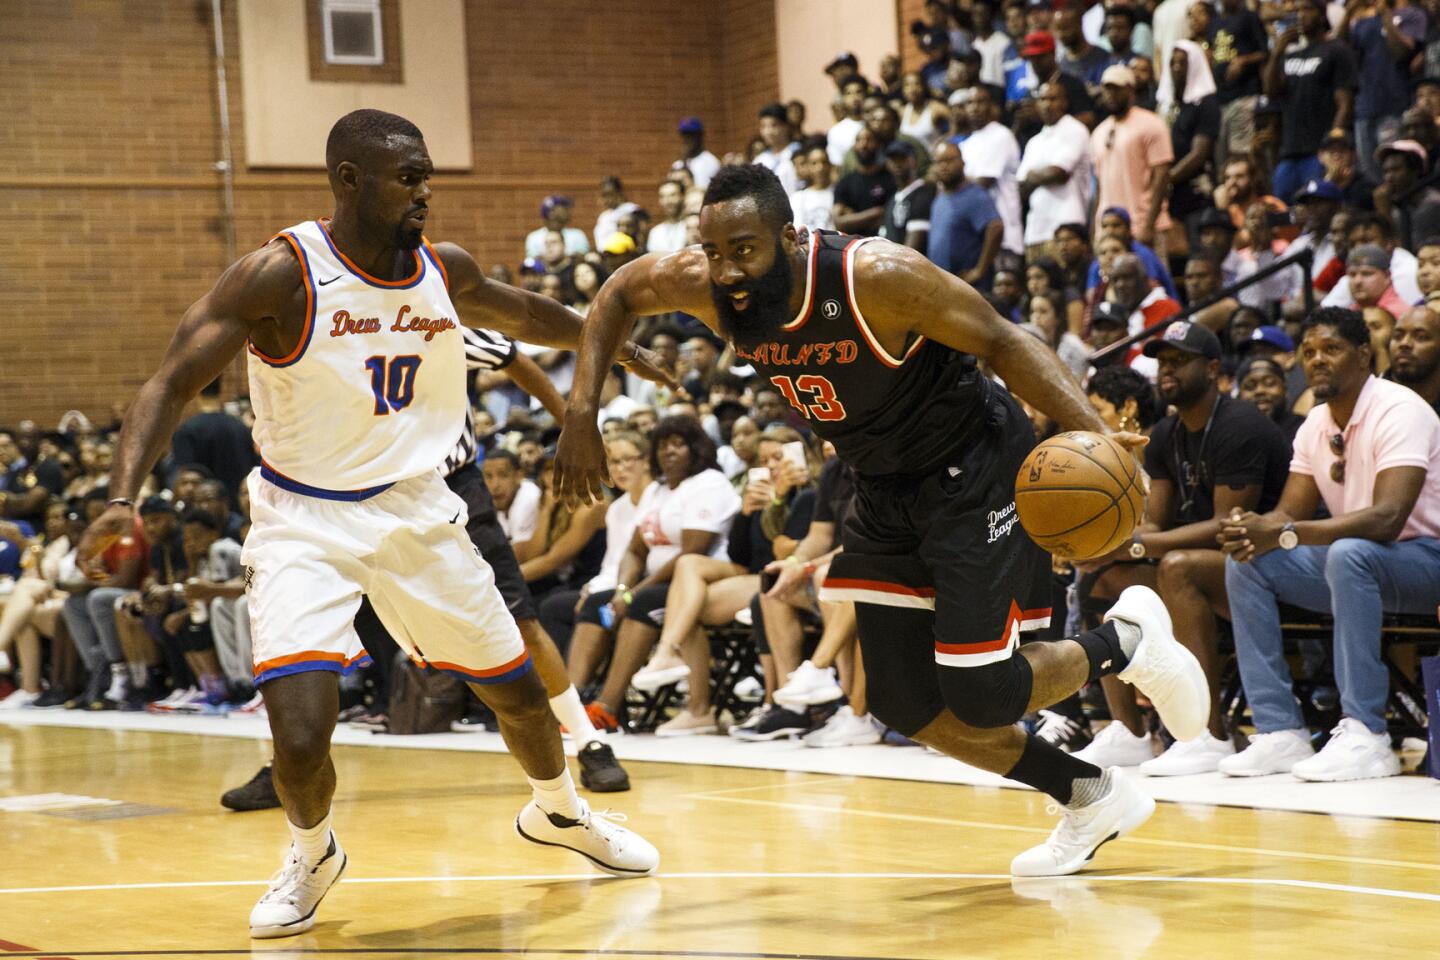 LeBron James Set To Make Much Awaited Return To Drew League After